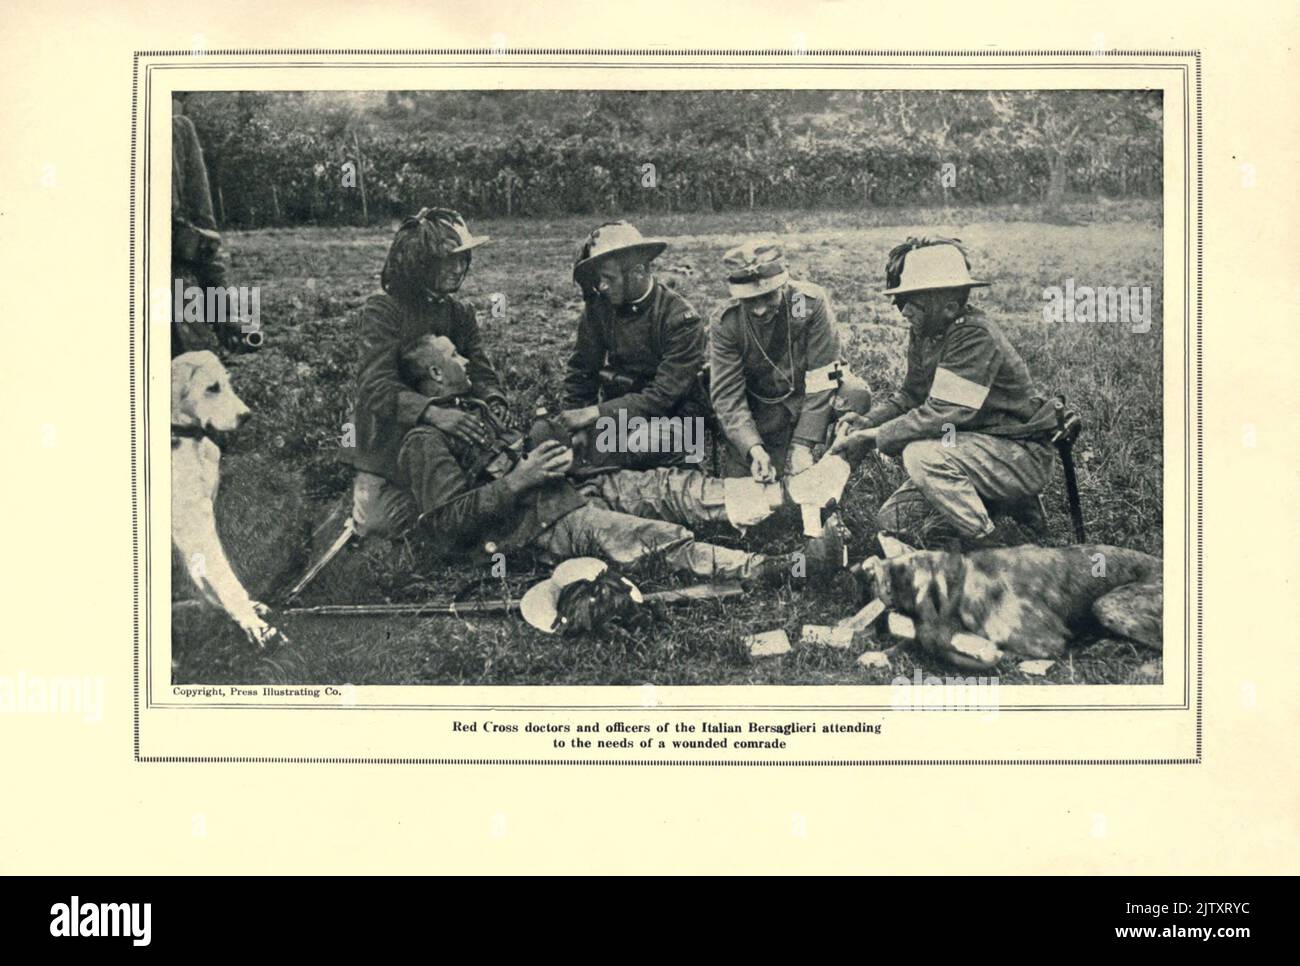 Red Cross Doctors, Medics and Officers of the Italian Bersaglieri attending to the needs of a Wounded Comrade from the book The story of the great war; the complete historical records of events to date DIPLOMATIC AND STATE PAPERS by Reynolds, Francis Joseph, 1867-1937; Churchill, Allen Leon; Miller, Francis Trevelyan, 1877-1959; Wood, Leonard, 1860-1927; Knight, Austin Melvin, 1854-1927; Palmer, Frederick, 1873-1958; Simonds, Frank Herbert, 1878-; Ruhl, Arthur Brown, 1876-  Published 1920 Stock Photo